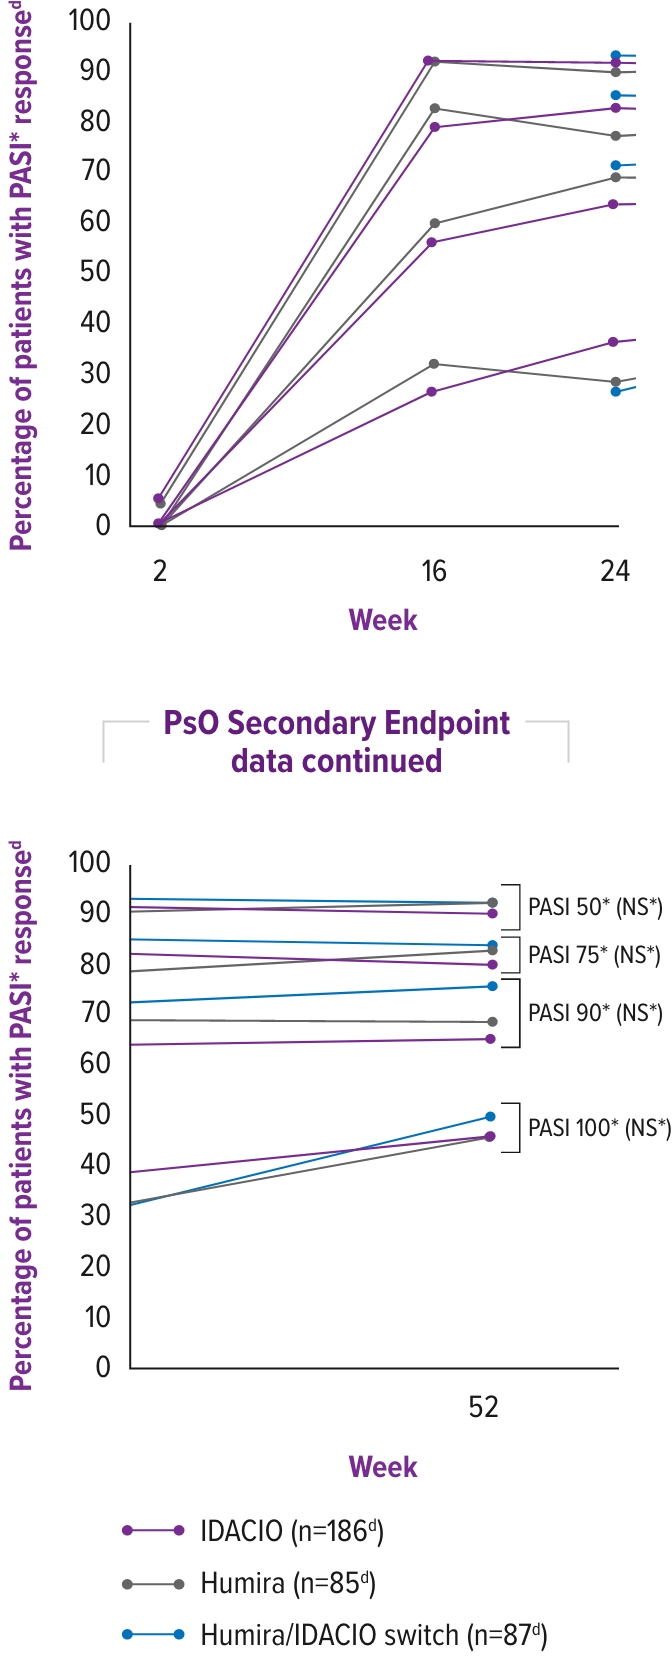 Line graph showing Secondary Endpoint of the AURIEL-PsO study